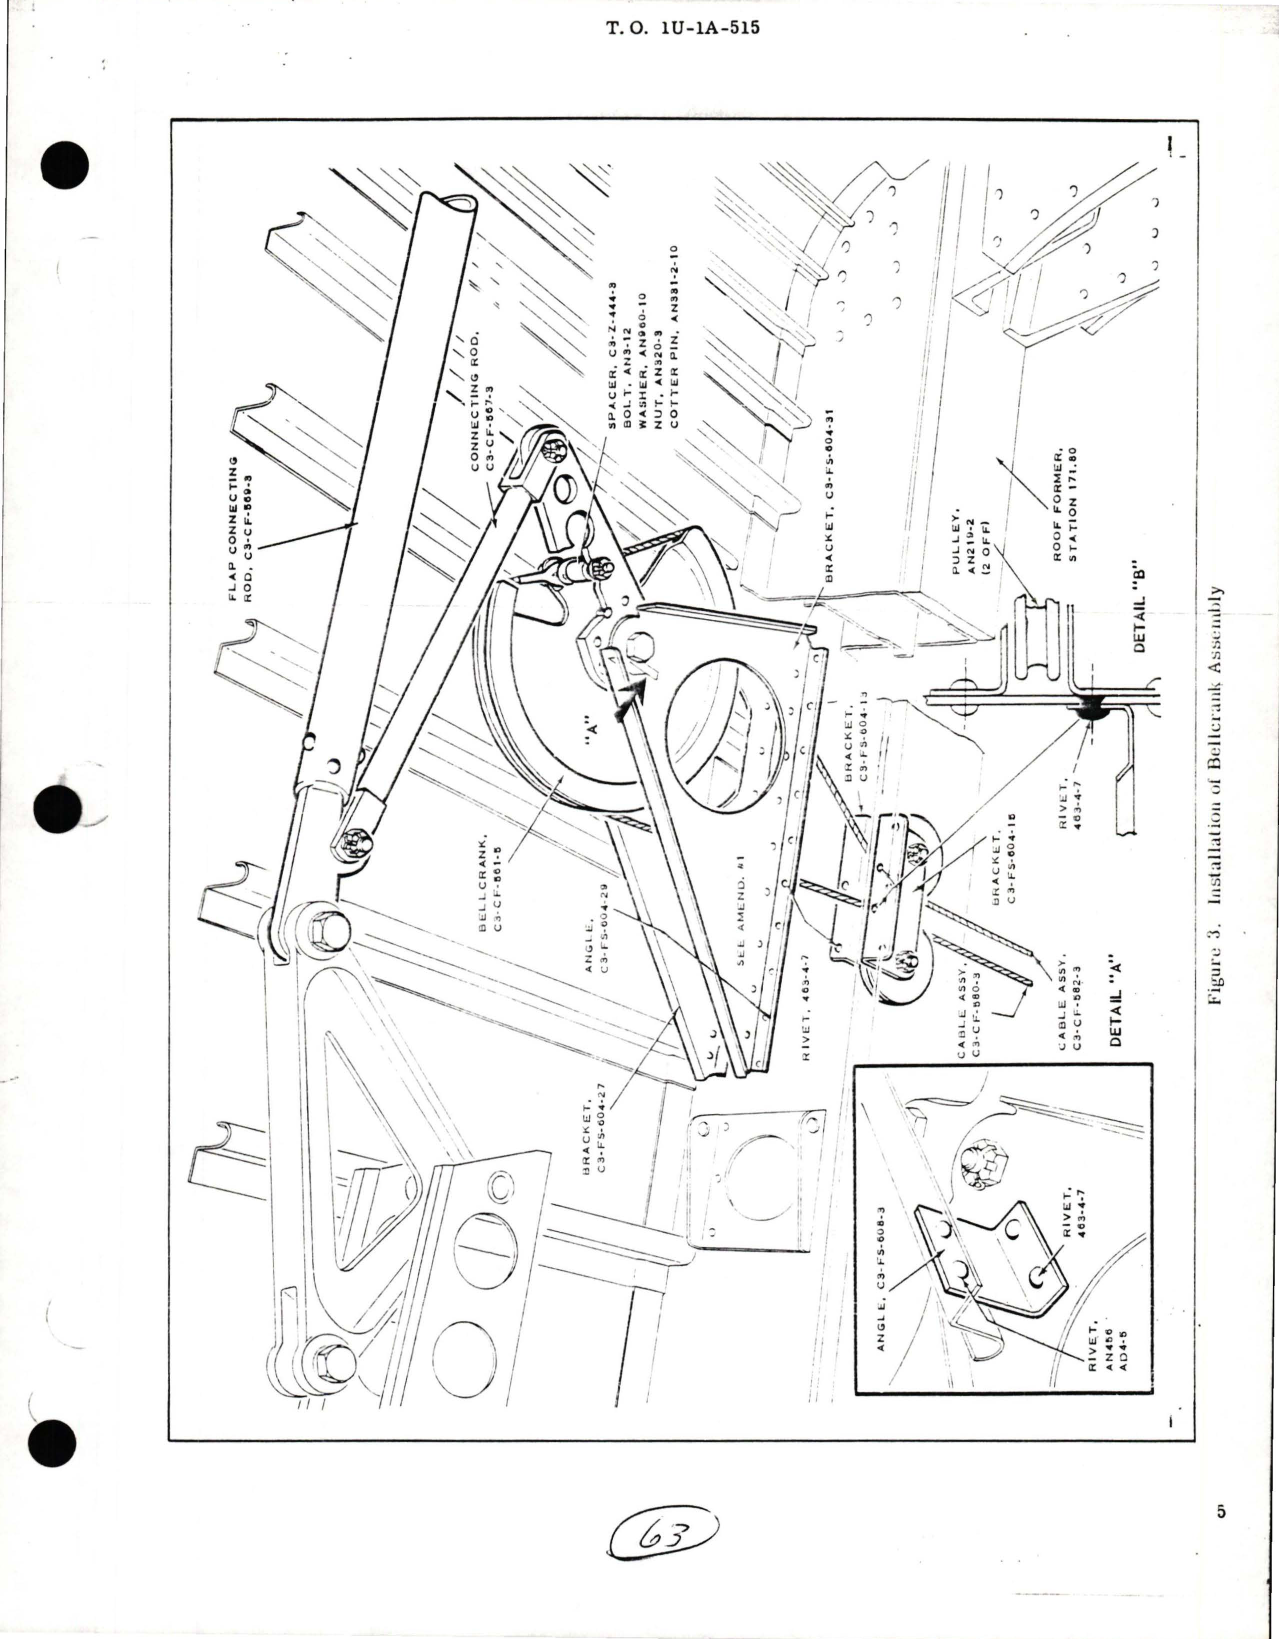 Sample page 5 from AirCorps Library document: Installation of Flap Operated Elevator Trim Tab on YU-1 and U-1A